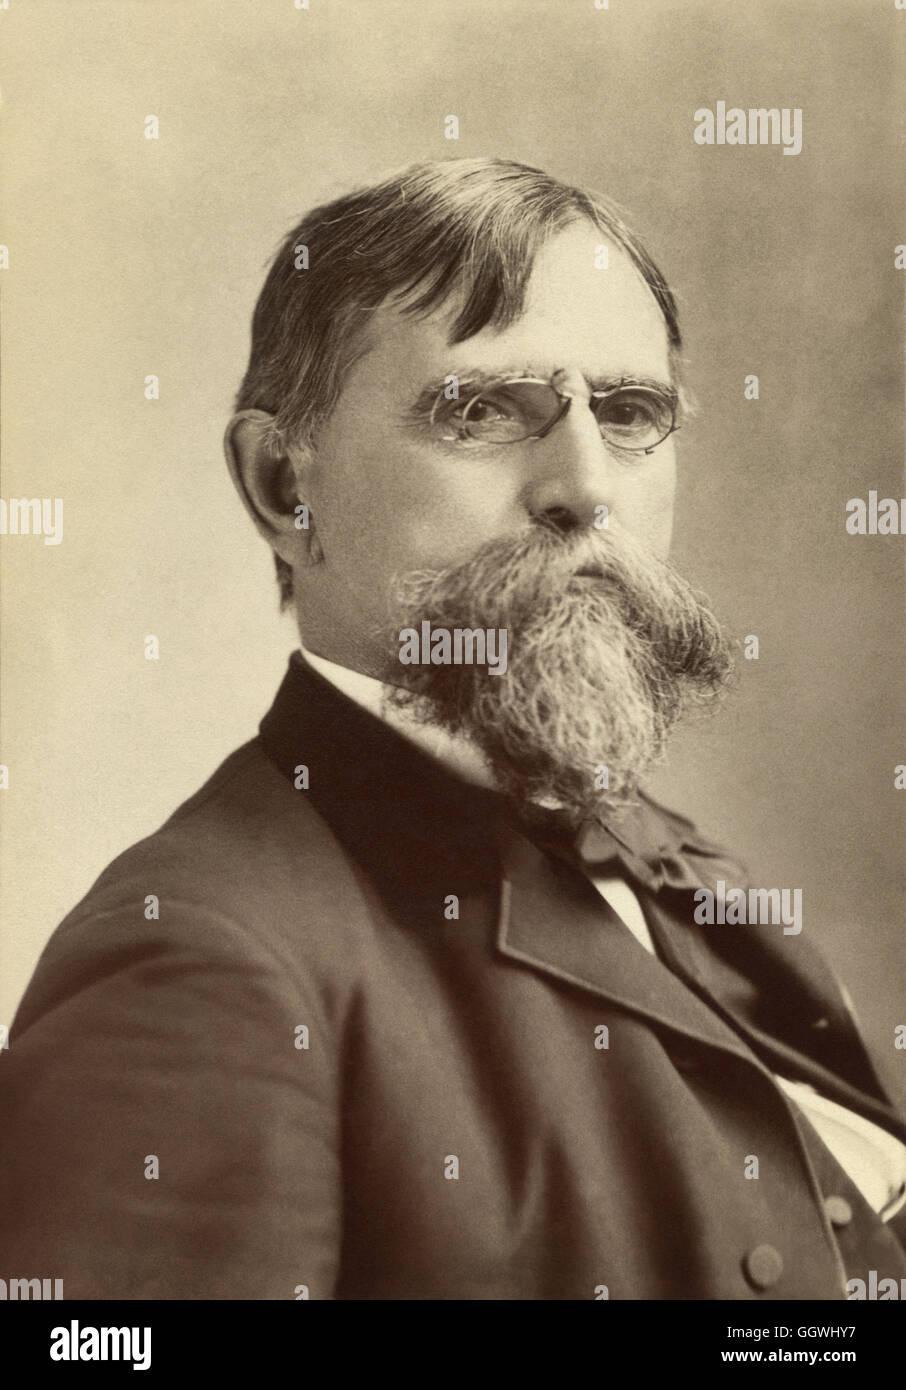 Lew (Lewis) Wallace (1827-1905) was the American author of the classic novel Ben-Hur: A Tale of the Christ (1880). Wallace was also a Civil War Union General, a lawyer, a governor of the New Mexico Territory, and a U.S. Minister to the Ottoman Empire in Constantinople (present-day Istanbul), Turkey. (Photo by Sarony) Stock Photo